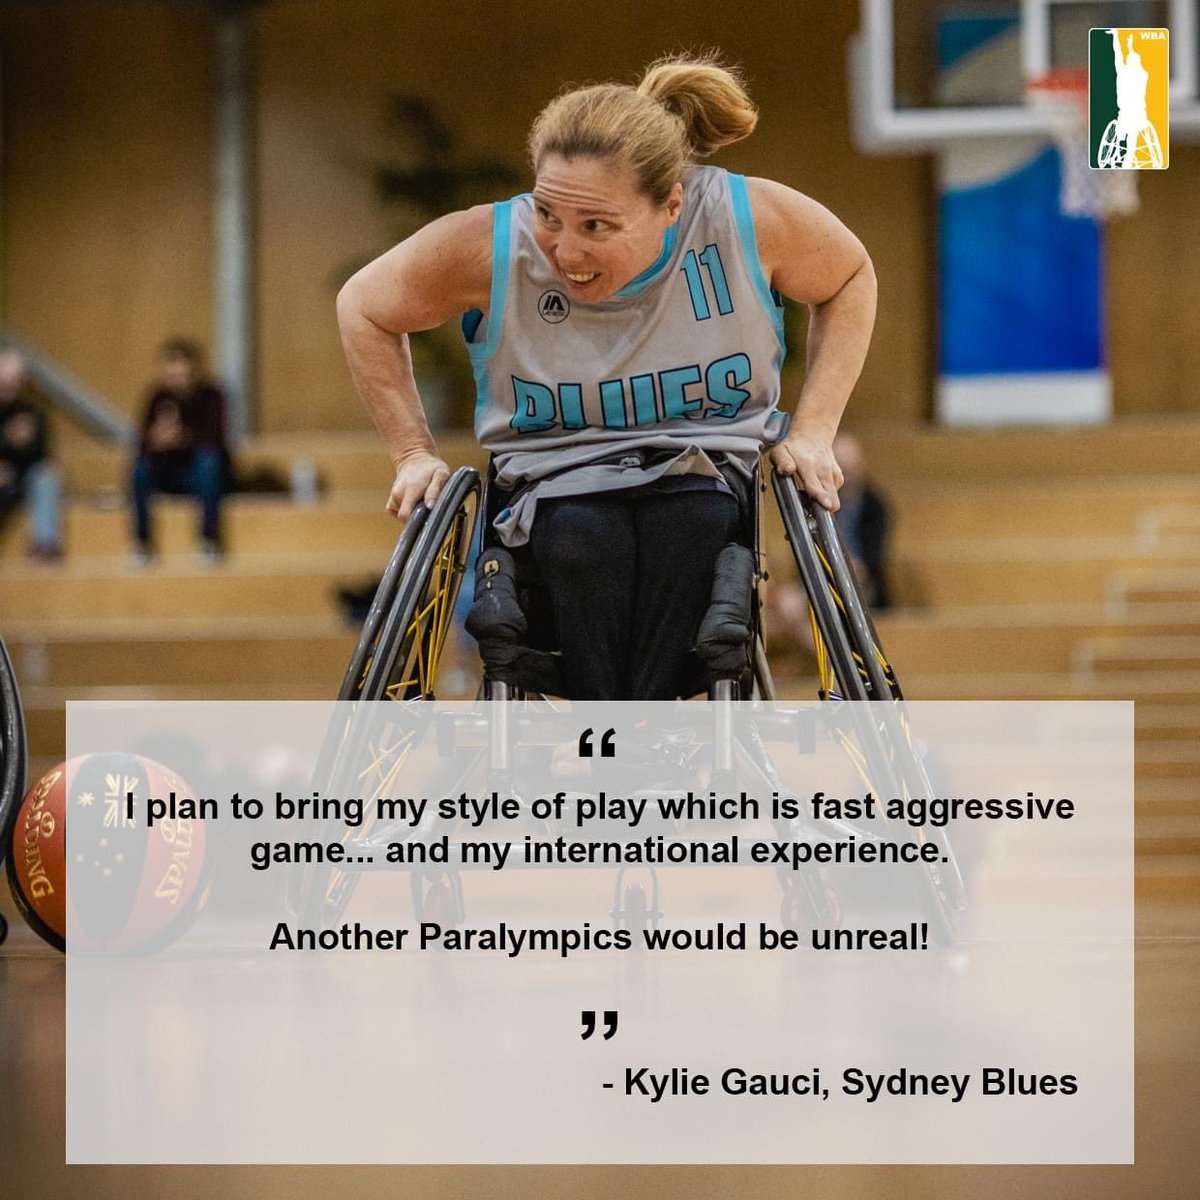 The @BasketballAus Gliders are looking to punch their ticket to Paris at the 2024 IWBF Repechage in Osaka, Japan. The top four placed teams will qualify with Kylie Gauci returning to the team and looking to add to her impressive international resume. @AUSParalympics